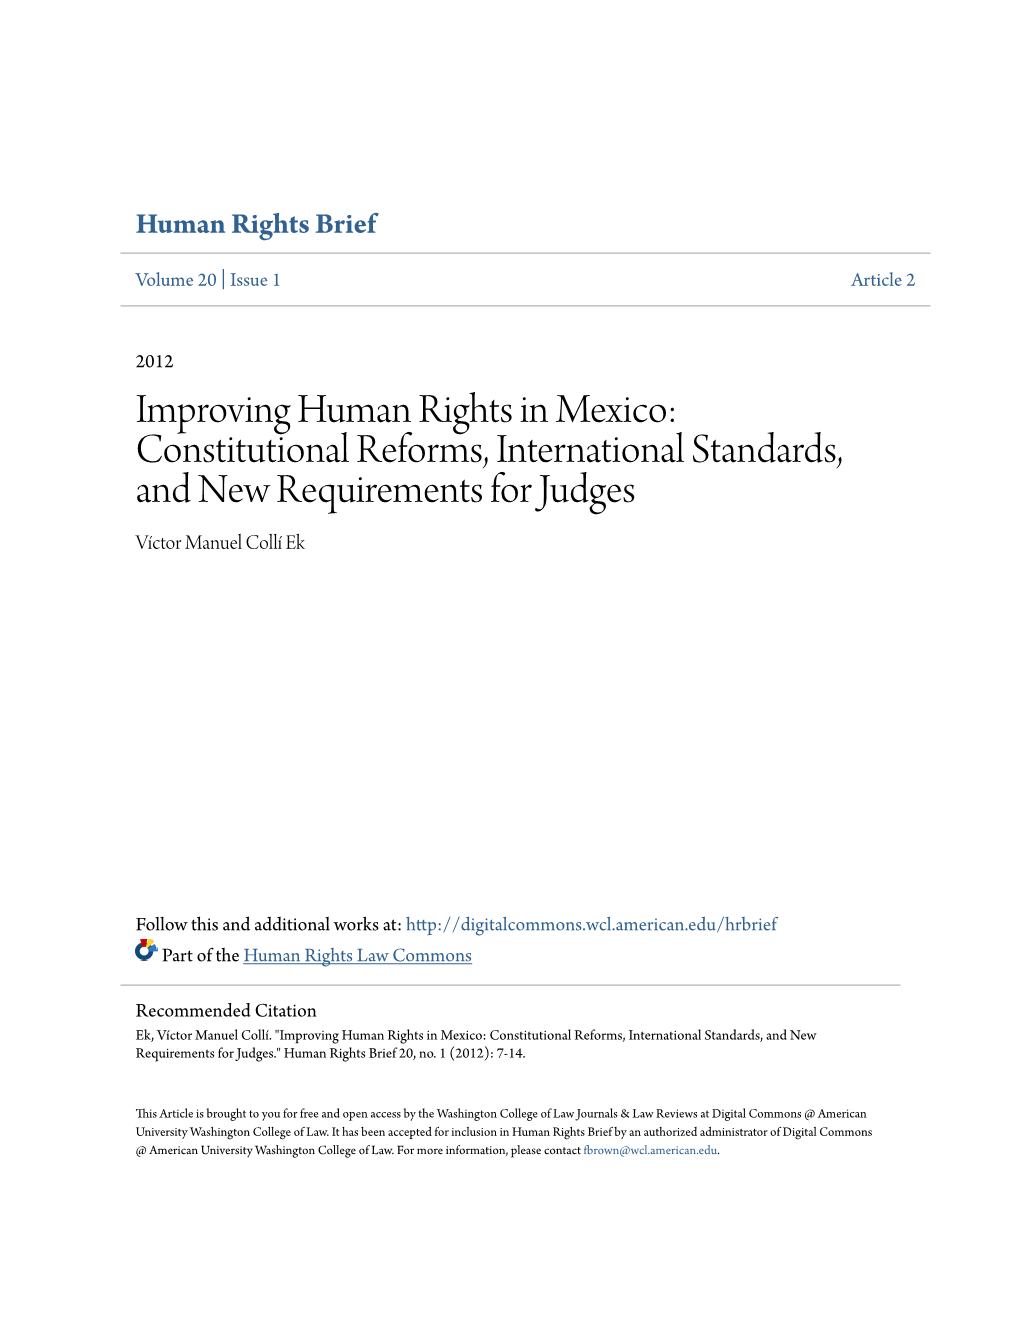 Improving Human Rights in Mexico: Constitutional Reforms, International Standards, and New Requirements for Judges Víctor Manuel Collí Ek